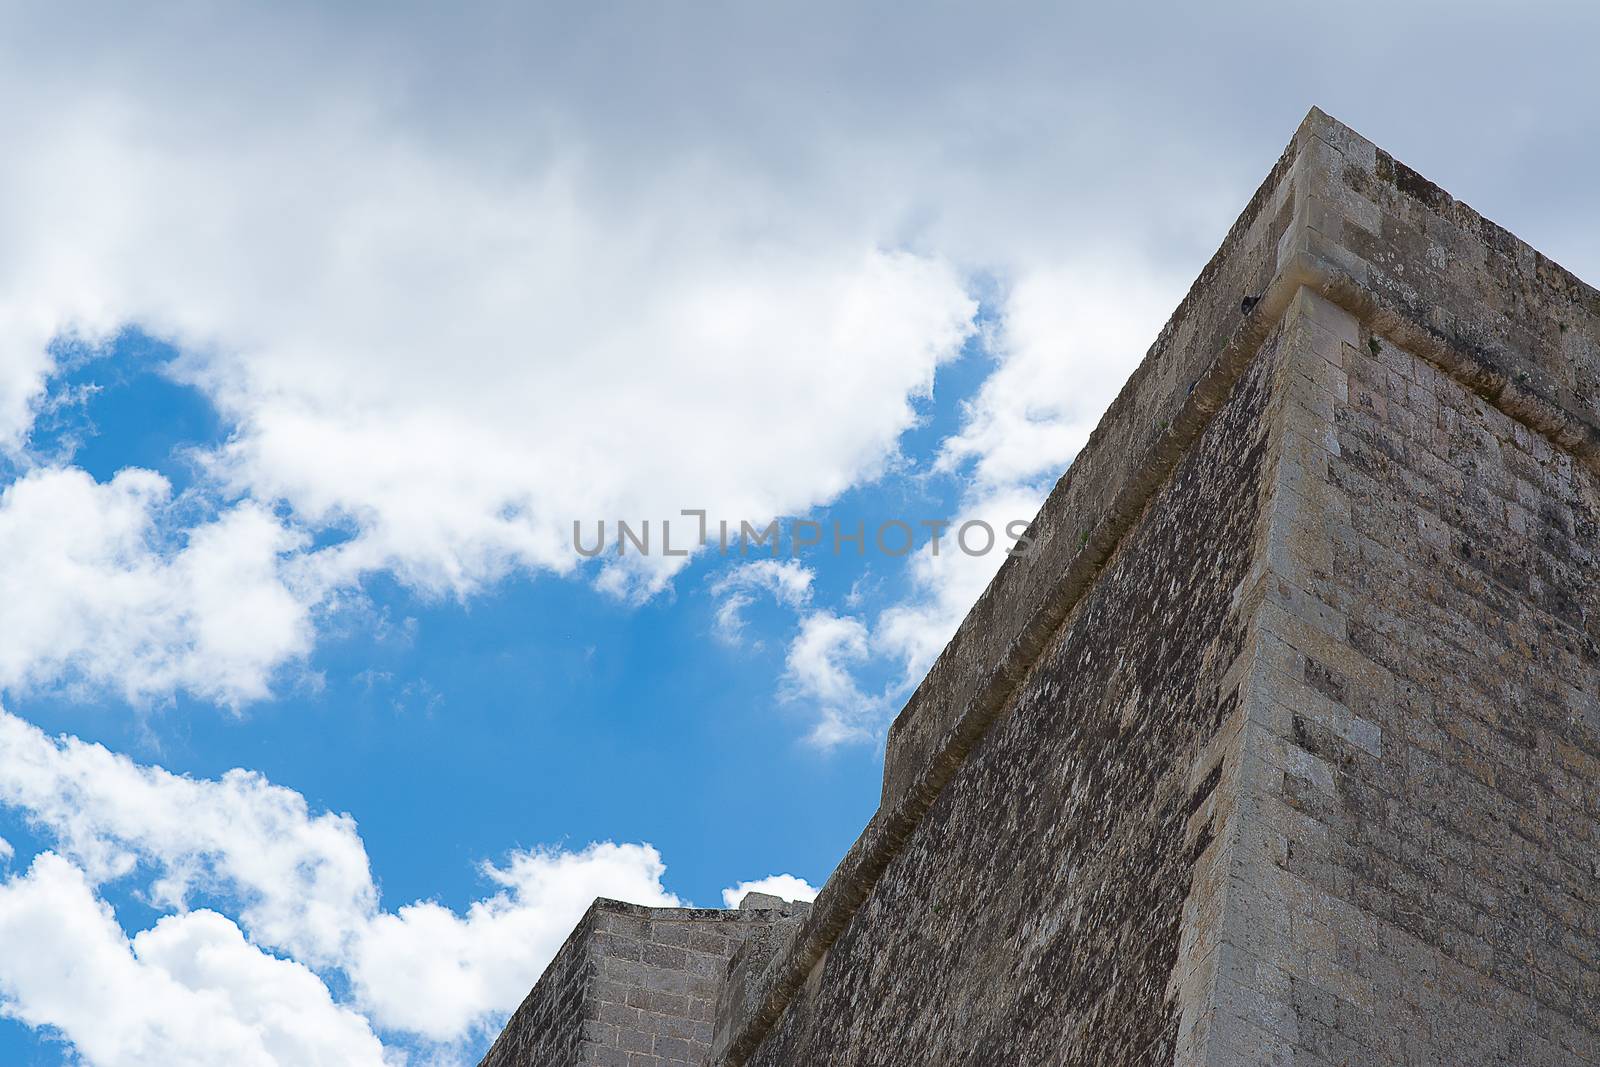 Pointed portion of the tower of the Castle of Otranto in Puglia